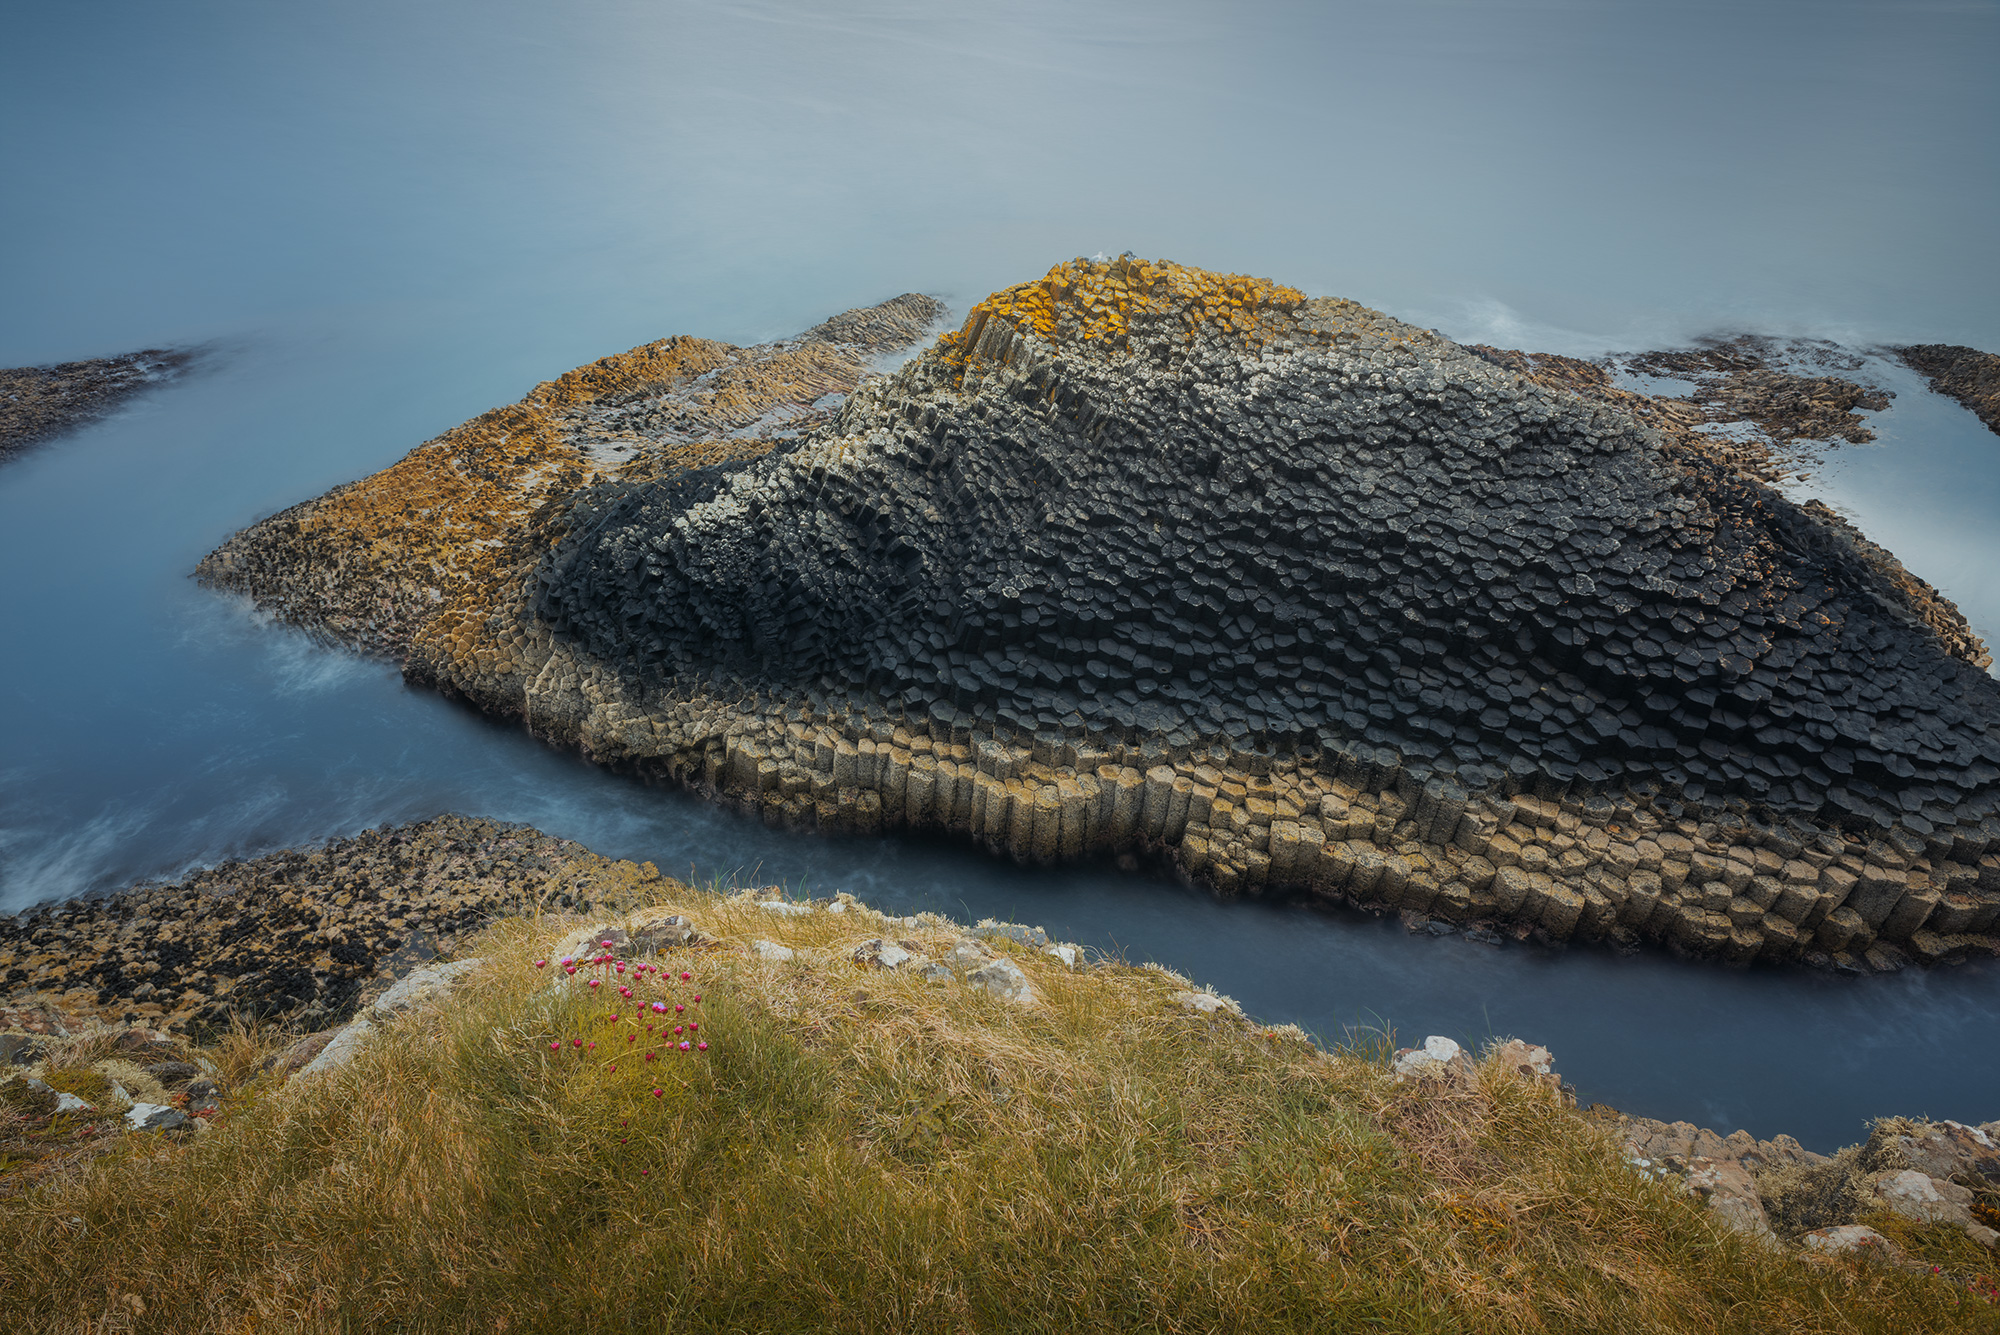 Immerse yourself in the mesmerizing beauty of Staffa Island, an enchanting isle off the coast of Mull Island in Scotland, with this captivating long exposure landscape photography captured by Swiss photographer Jennifer Esseiva and her Nikon D810. Witness the dramatic basaltic formations sculpted by the forces of nature over millennia, standing stoically against the elements. With its long exposure technique, this photograph reveals the dynamic movement of the surrounding waves, adding a sense of motion and drama to the scene. Join Jennifer Esseiva on this visual odyssey as she captures the timeless allure of Staffa Island, where every detail speaks to the power and majesty of the natural world.